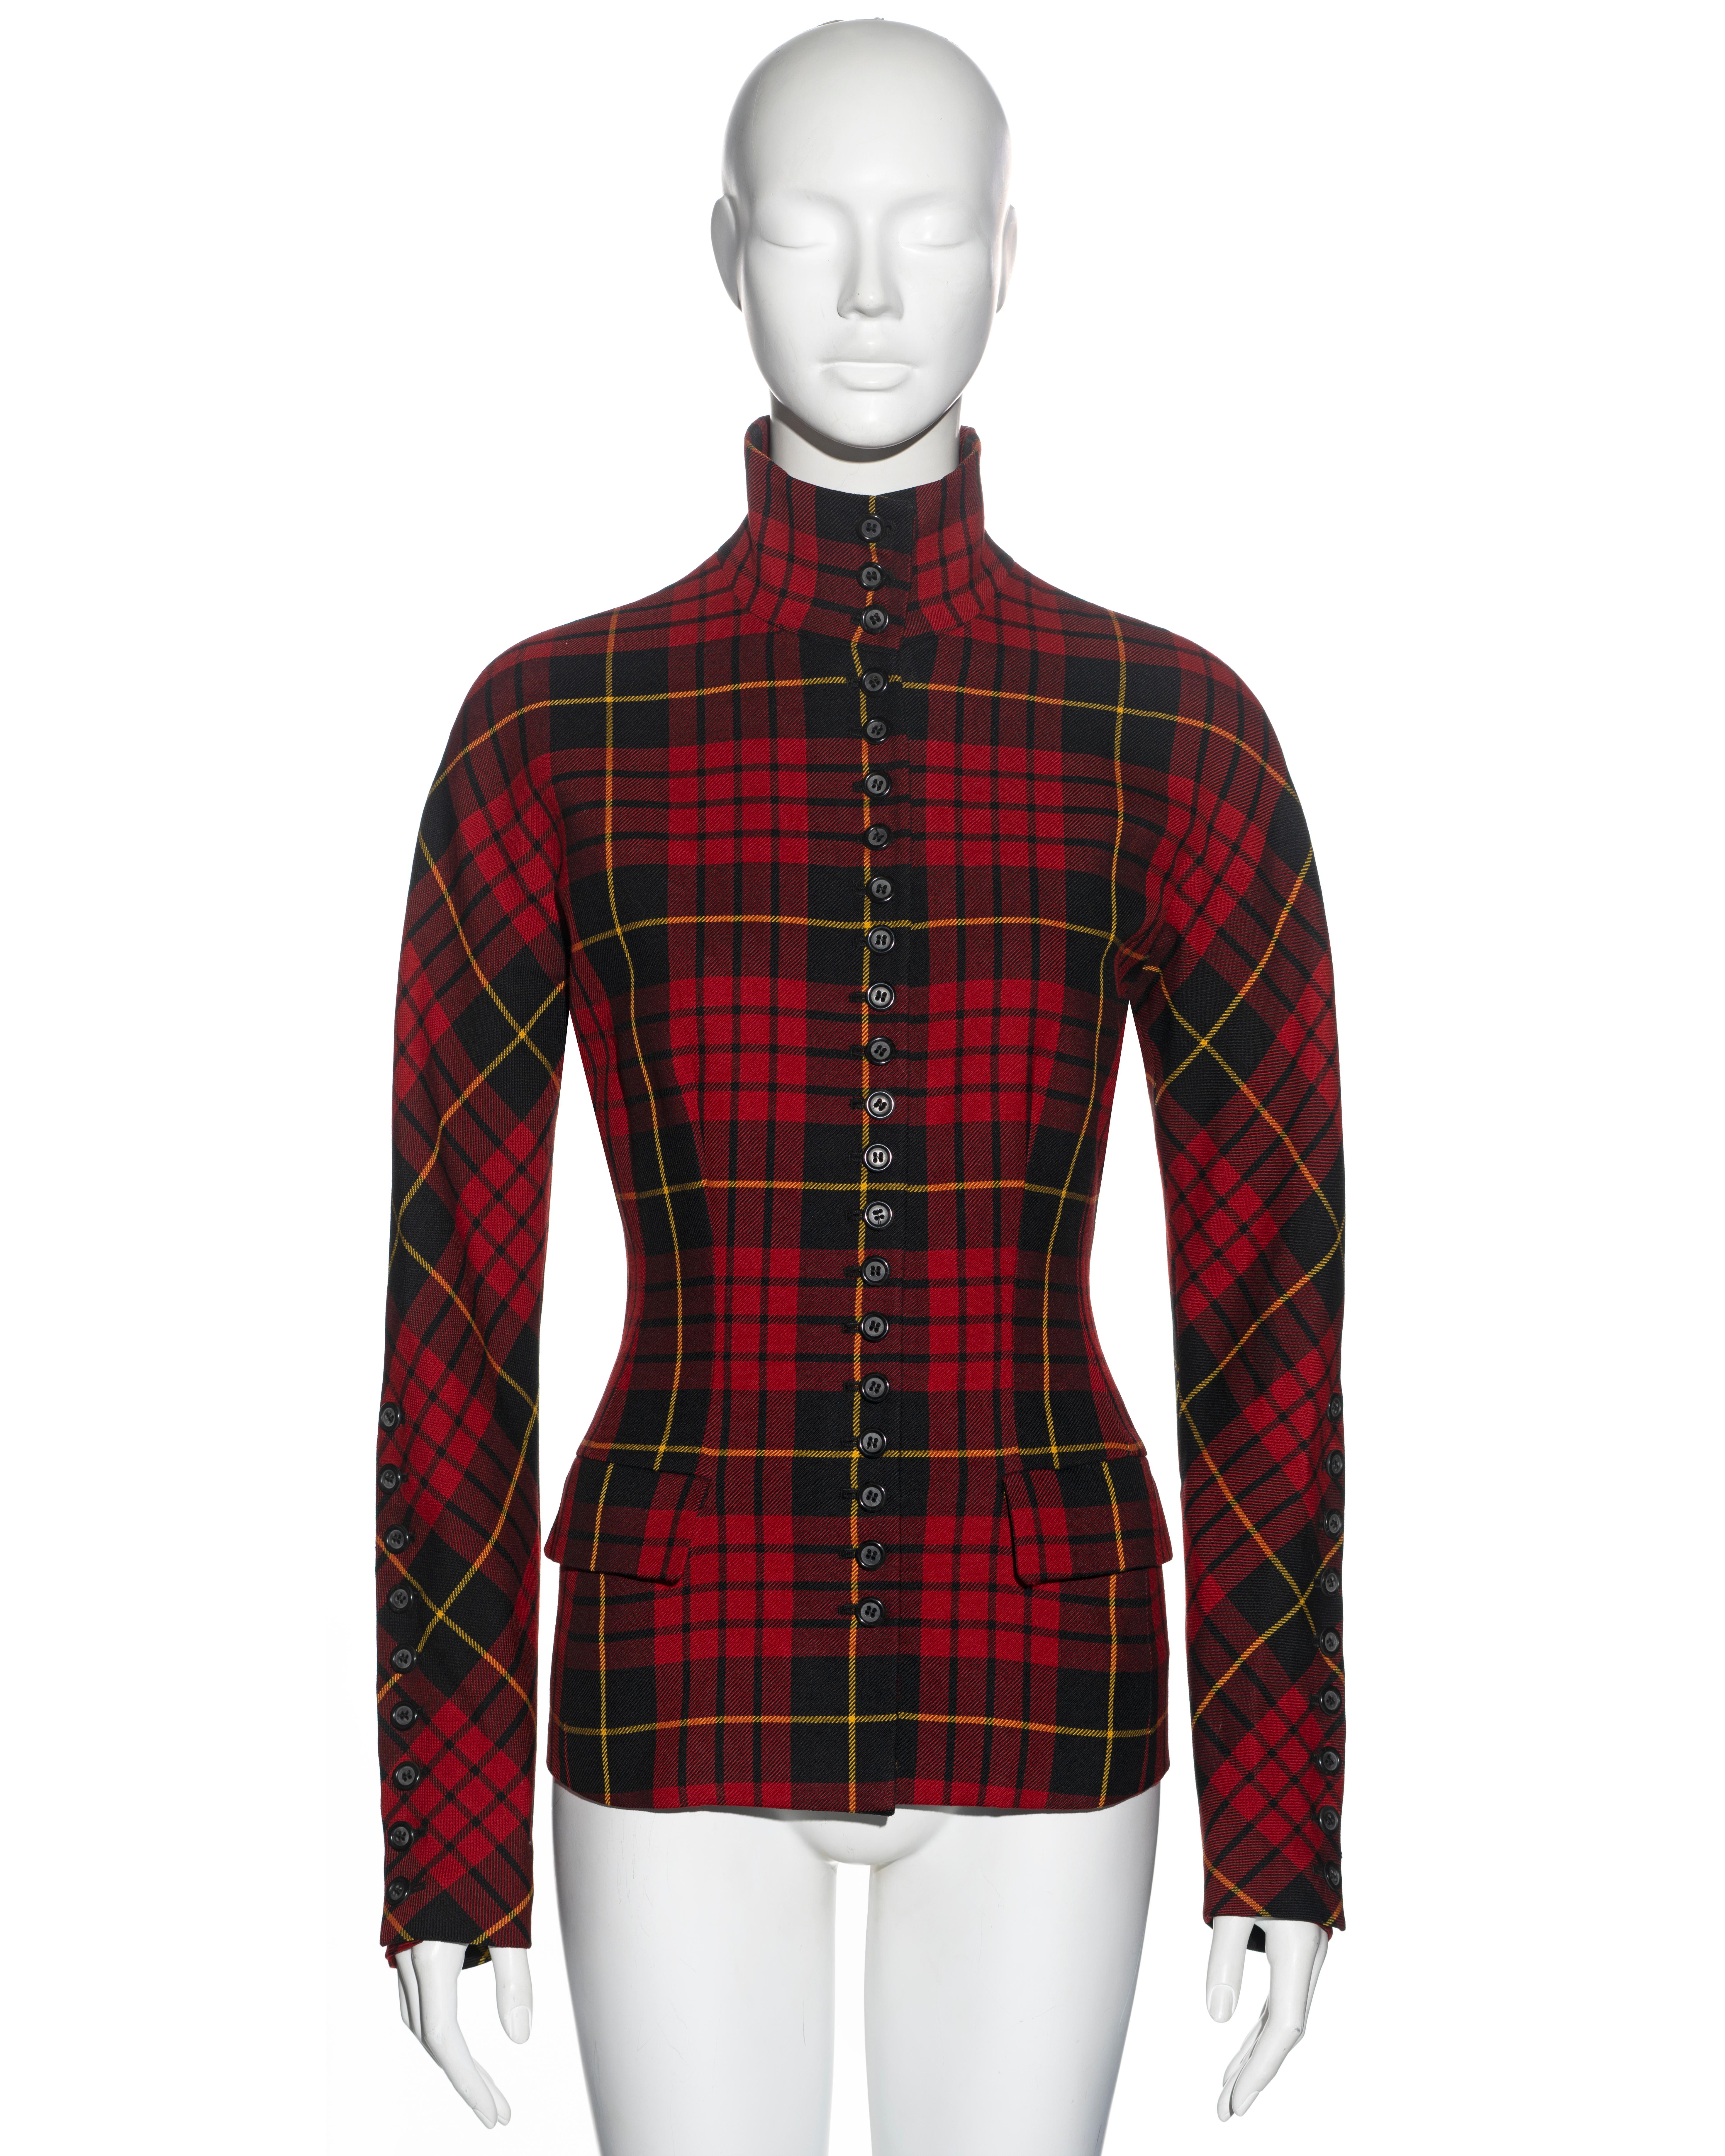 ▪ Alexander McQueen tailored 'Joan' jacket
▪ Sold by One of a Kind Archive 
▪ Museum quality
▪ Constructed from red and black tartan wool 
▪ Twenty-one buttons to the front and nine to each sleeve
▪ Standing collar 
▪ Two front flap pockets 
▪ Lined